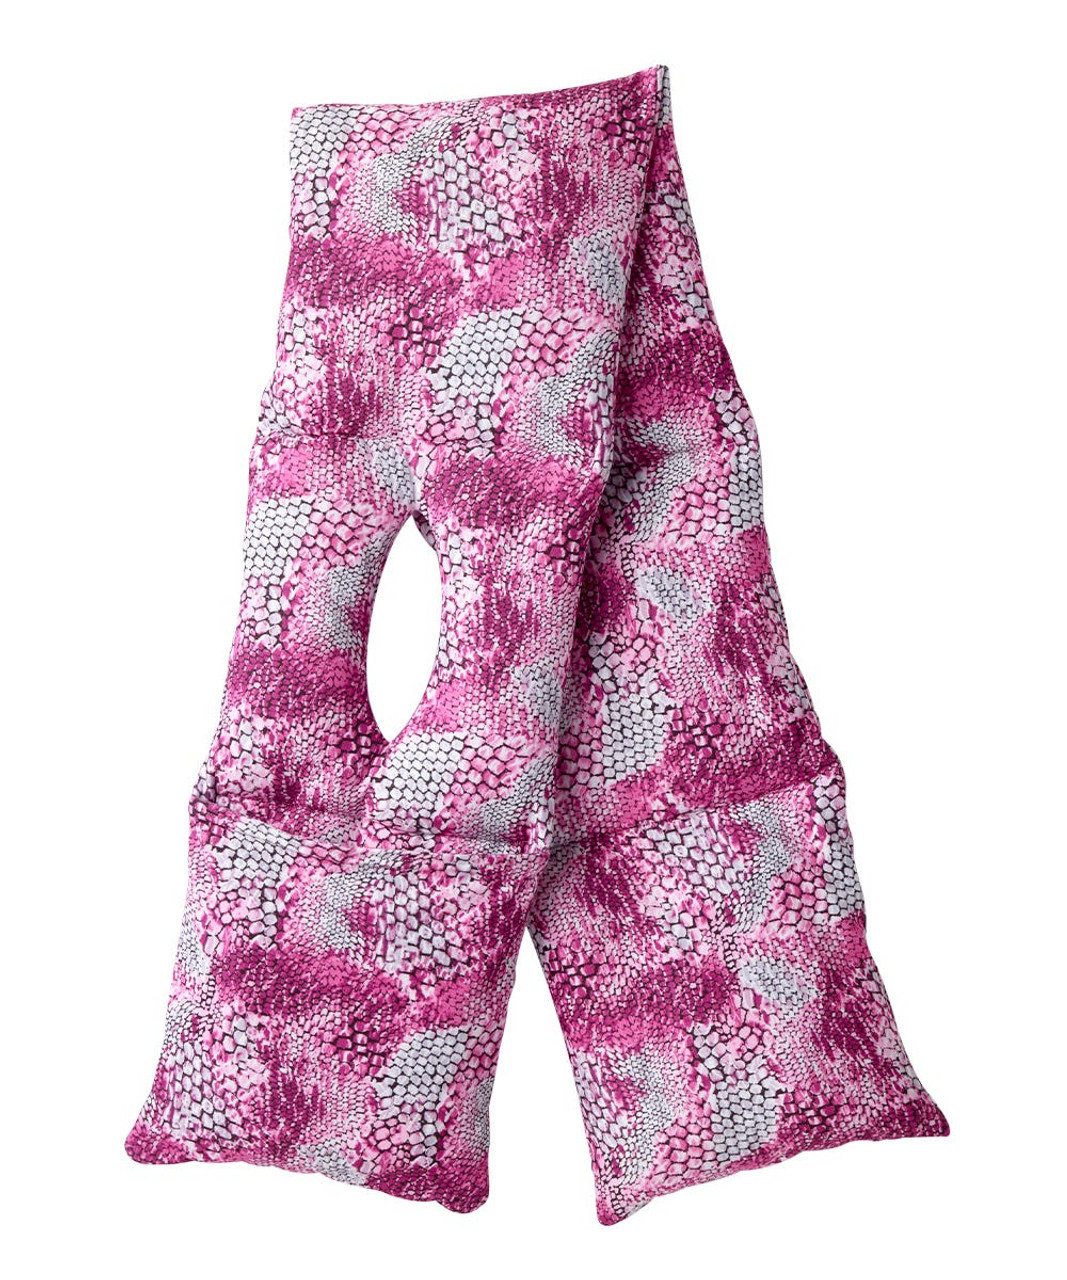 Silverts SV506 Senior Women's Post-Surgical Puffer Scarf with Travel Pouch Dk. Pink Print, Size=OS, SV506-SV2087-OS